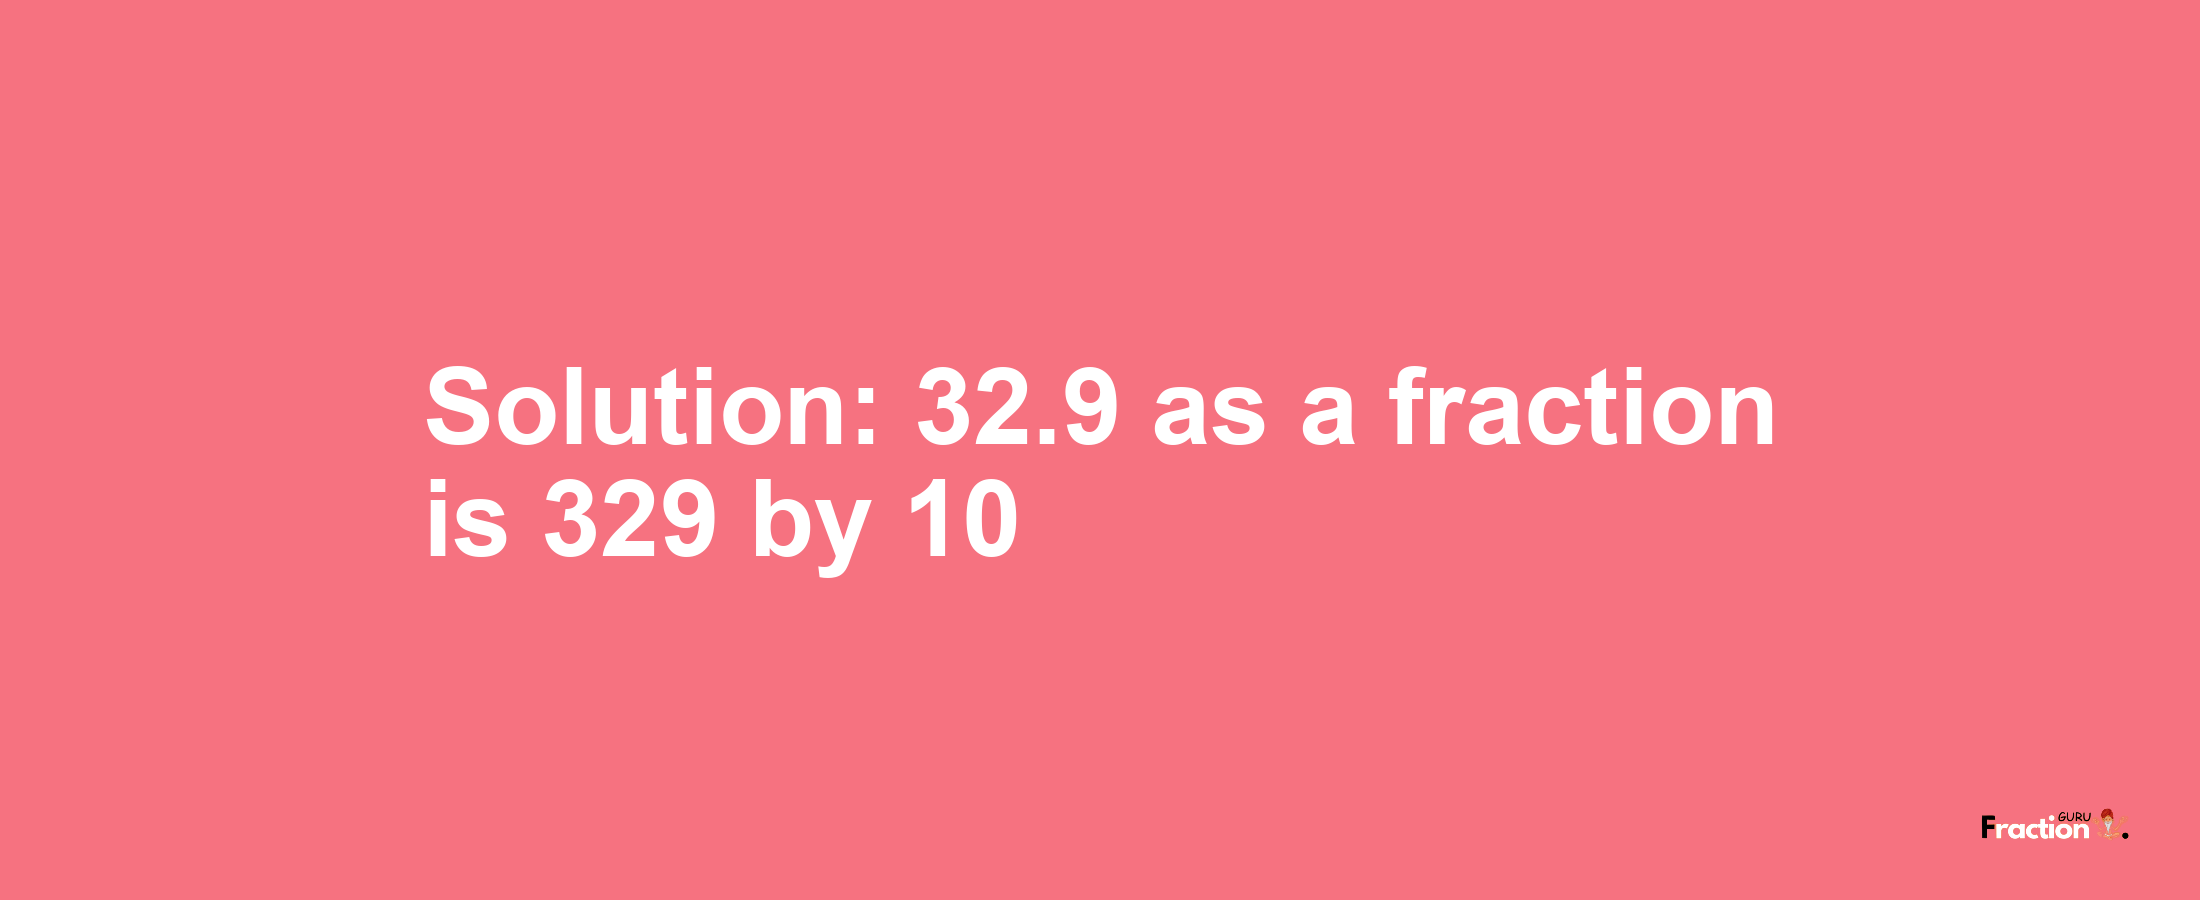 Solution:32.9 as a fraction is 329/10